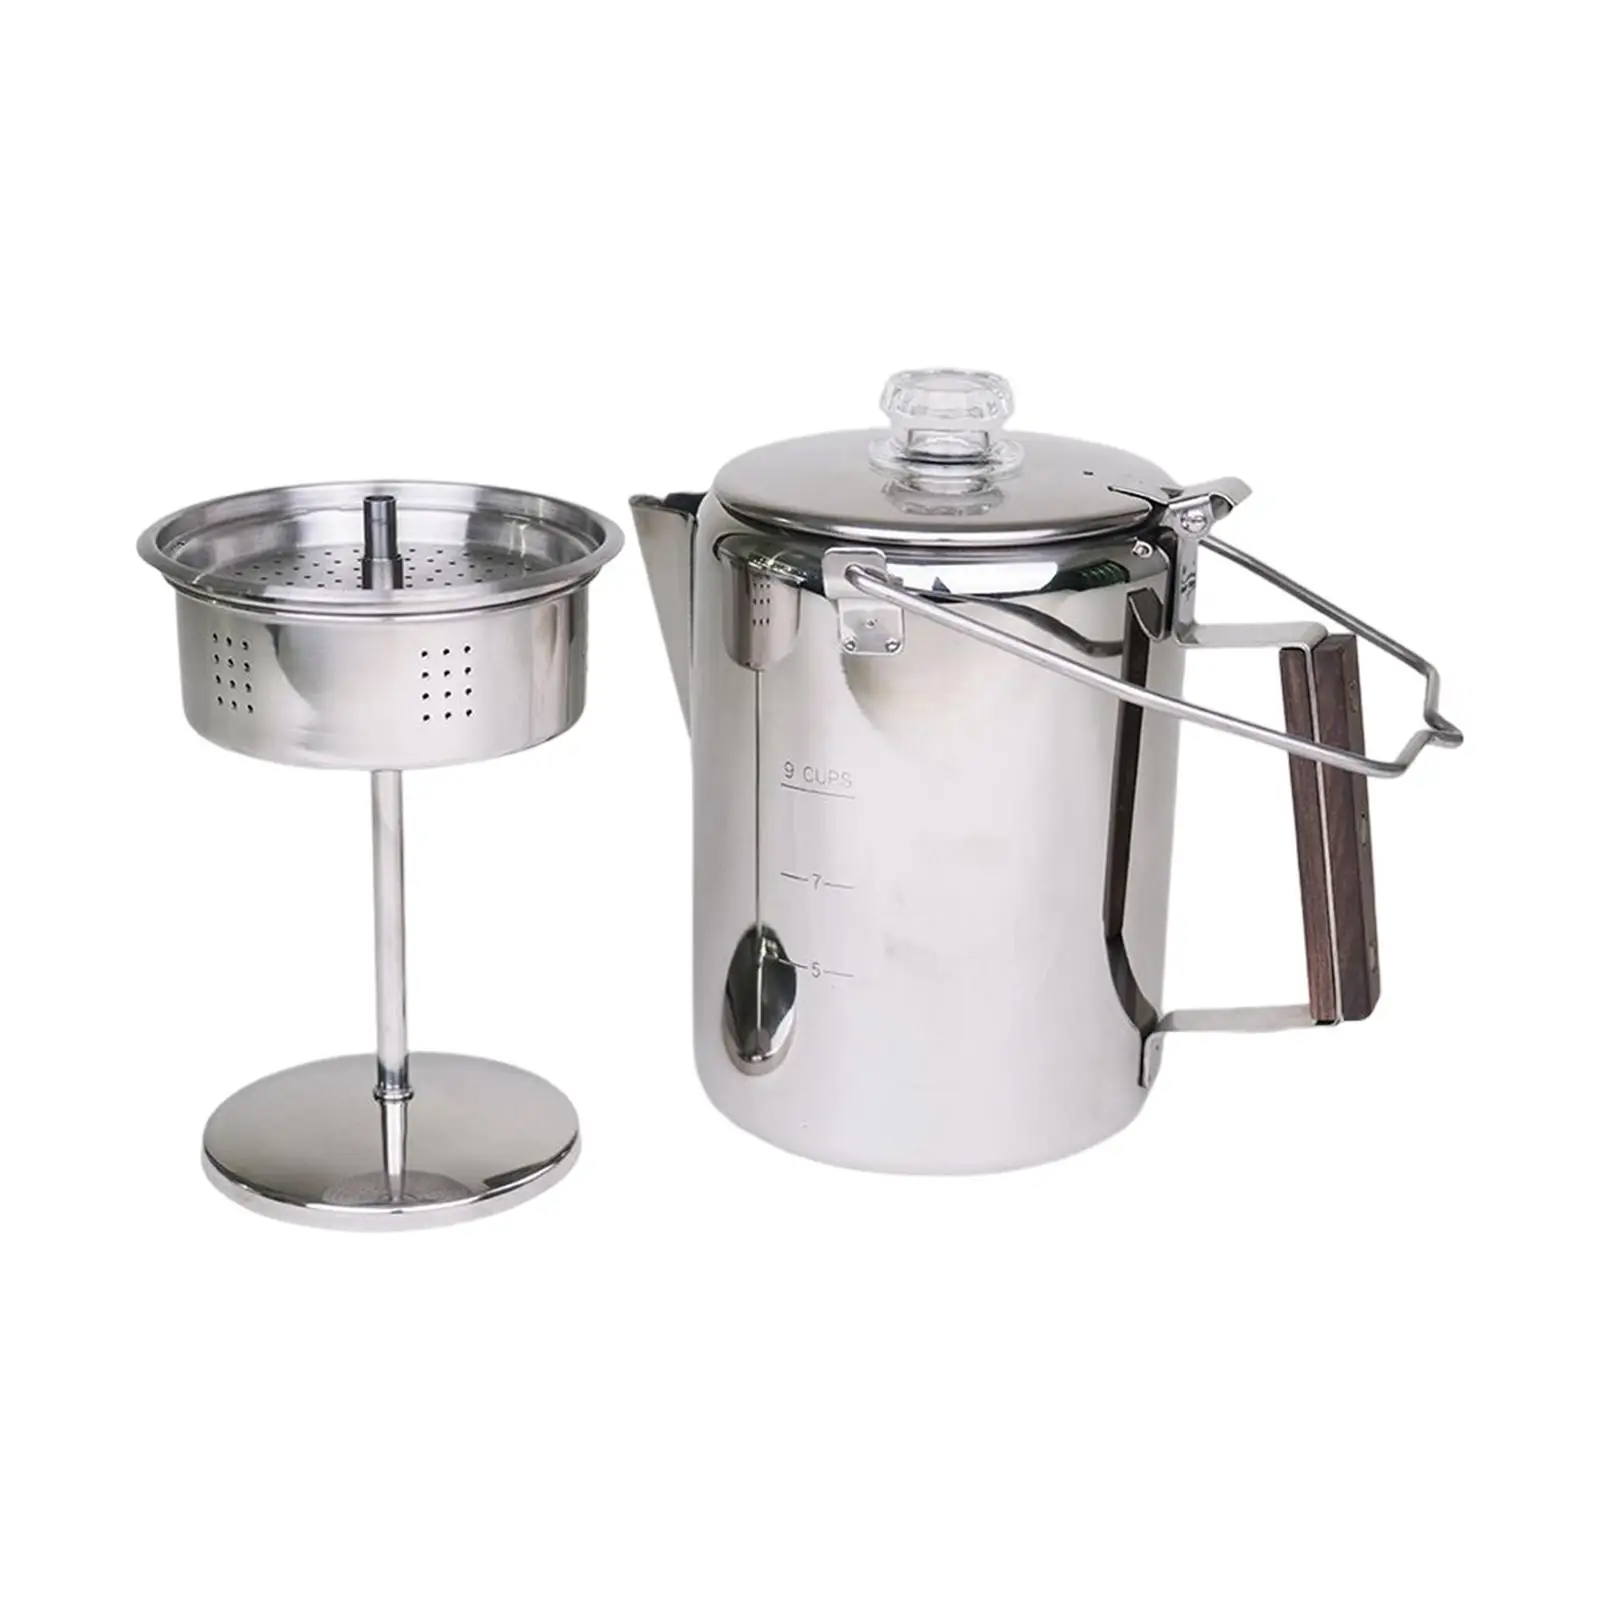 Coffee Percolator Camping Over Fire Stainless Steel Coffee Maker Percolator for Camping Home